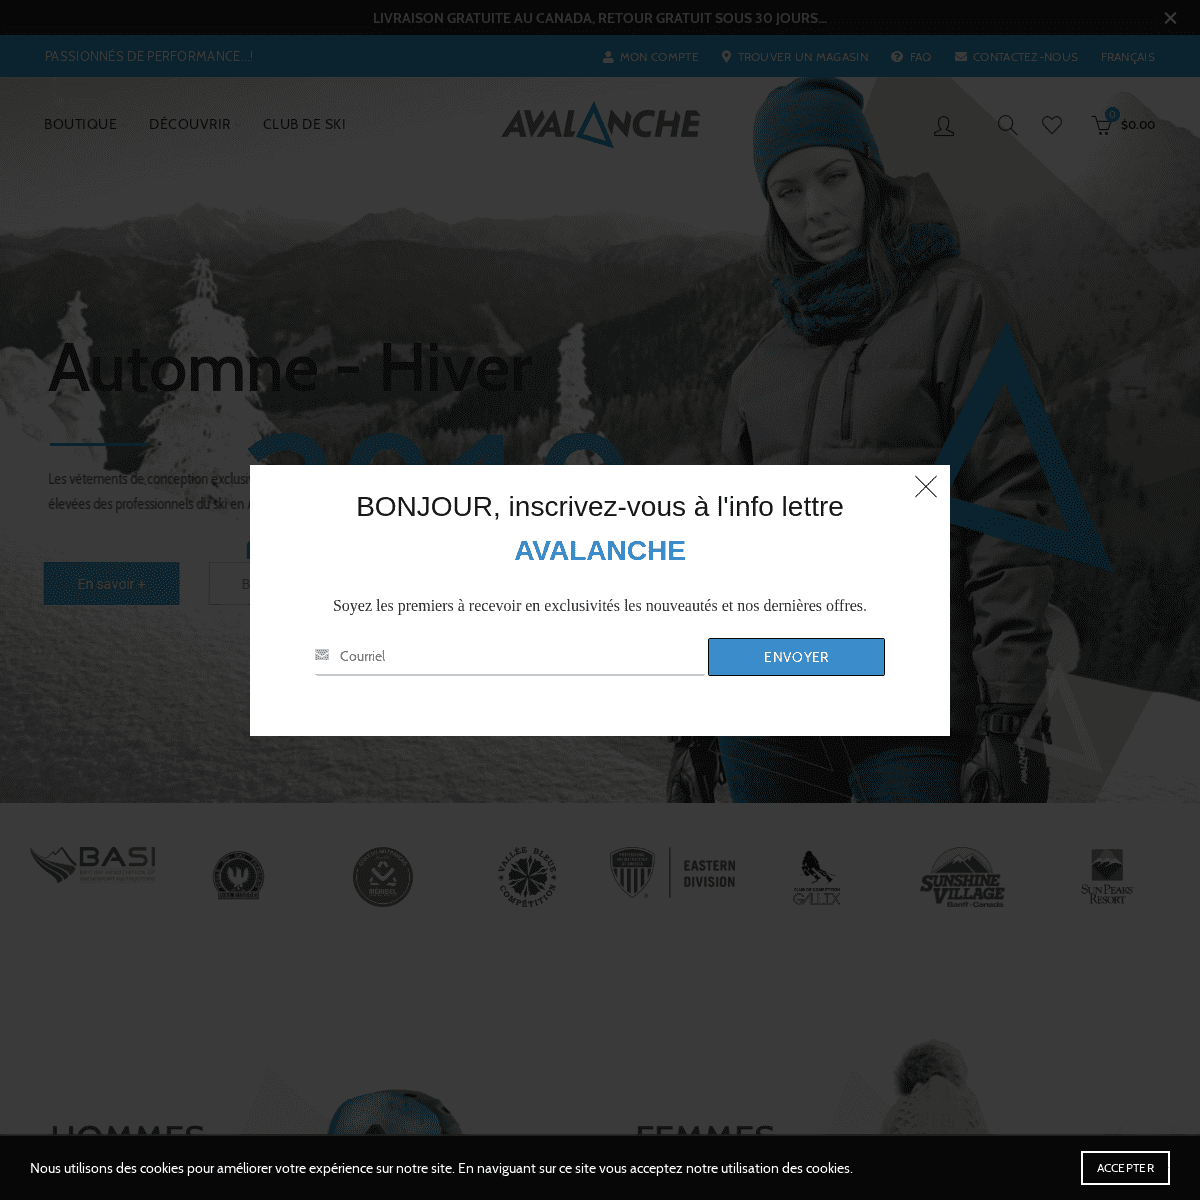 A complete backup of avalancheskiwear.com